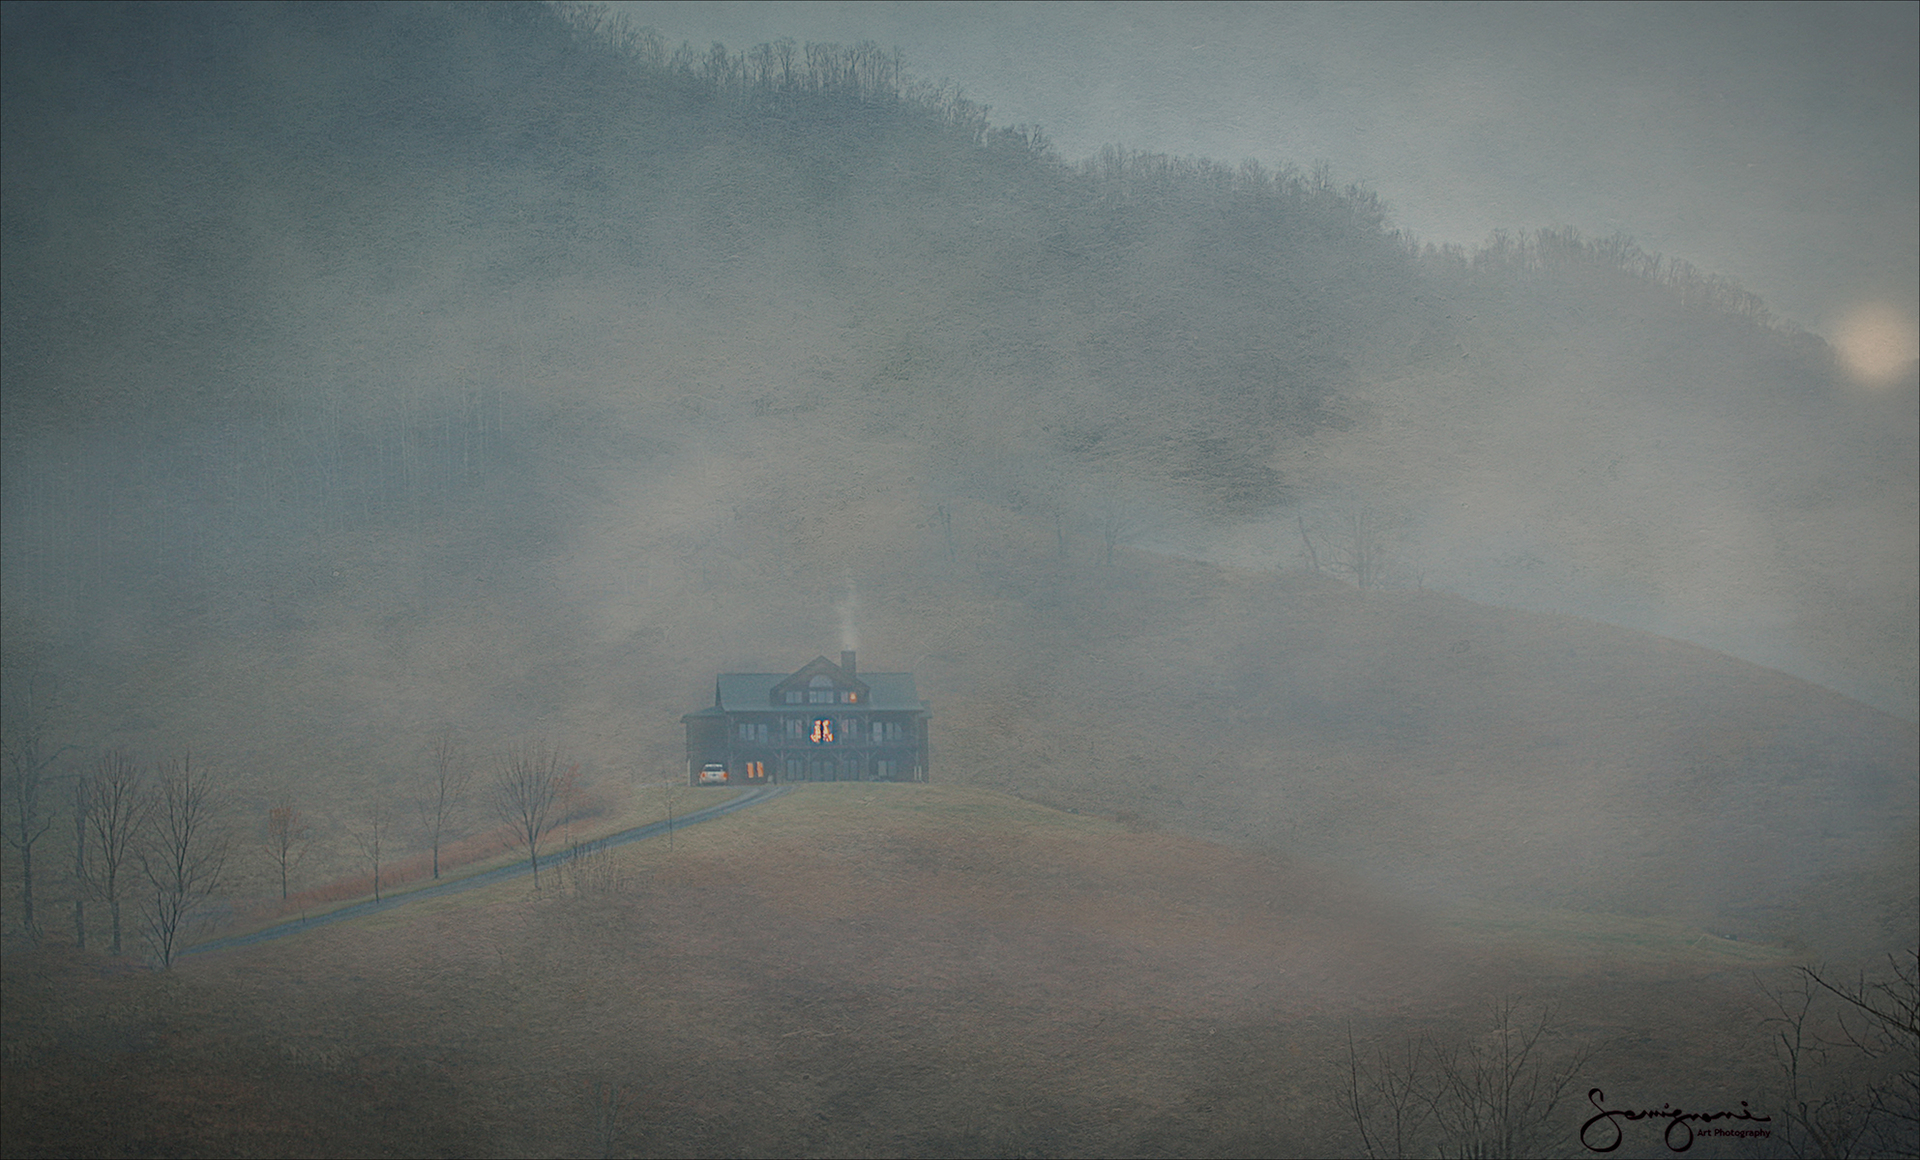 House in Fog, Crab Tree, NC